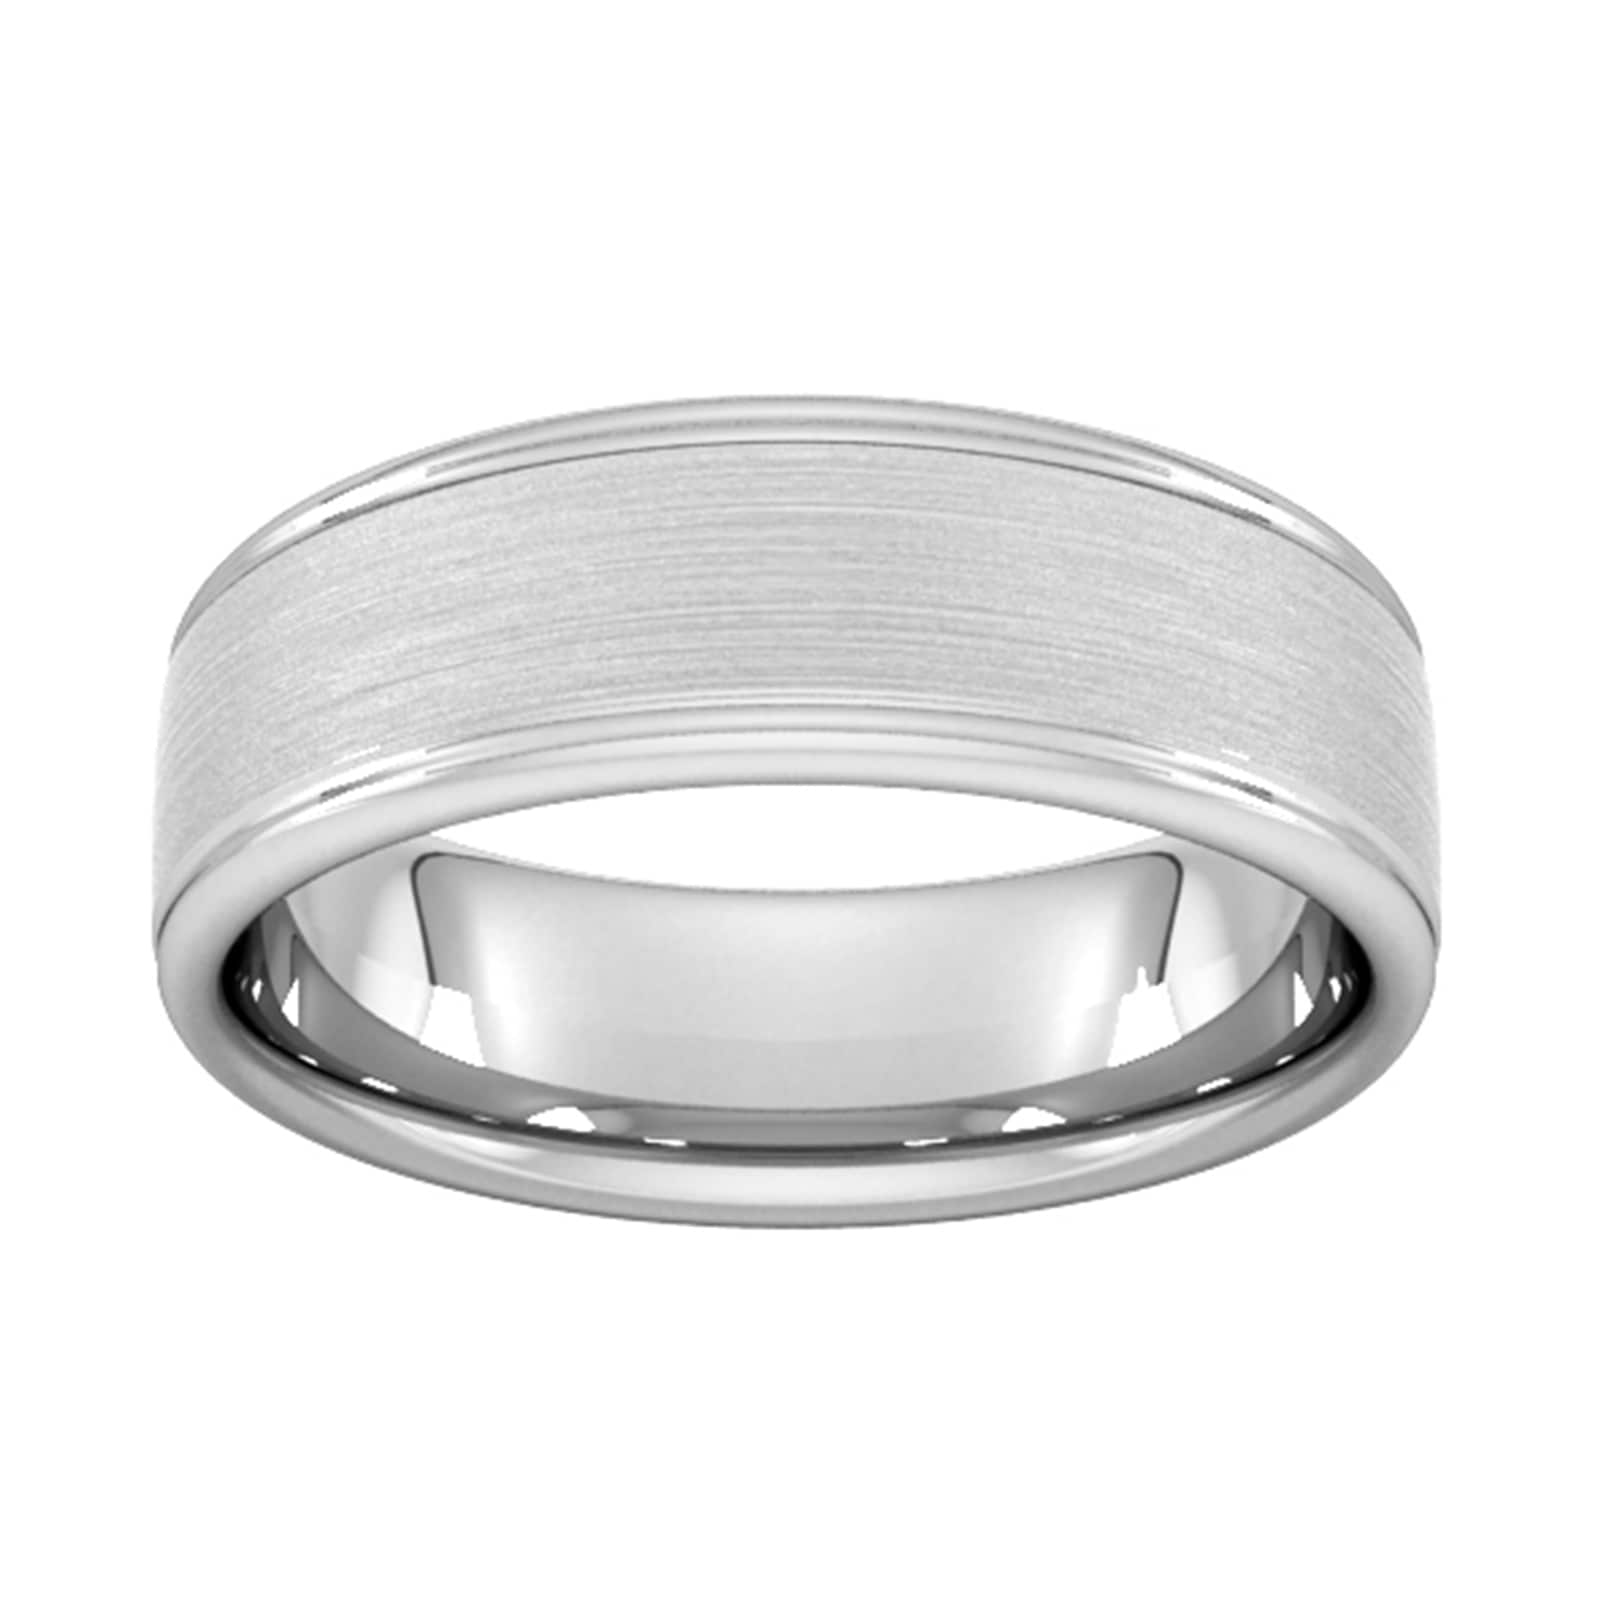 7mm Slight Court Heavy Matt Centre With Grooves Wedding Ring In 9 Carat White Gold - Ring Size O